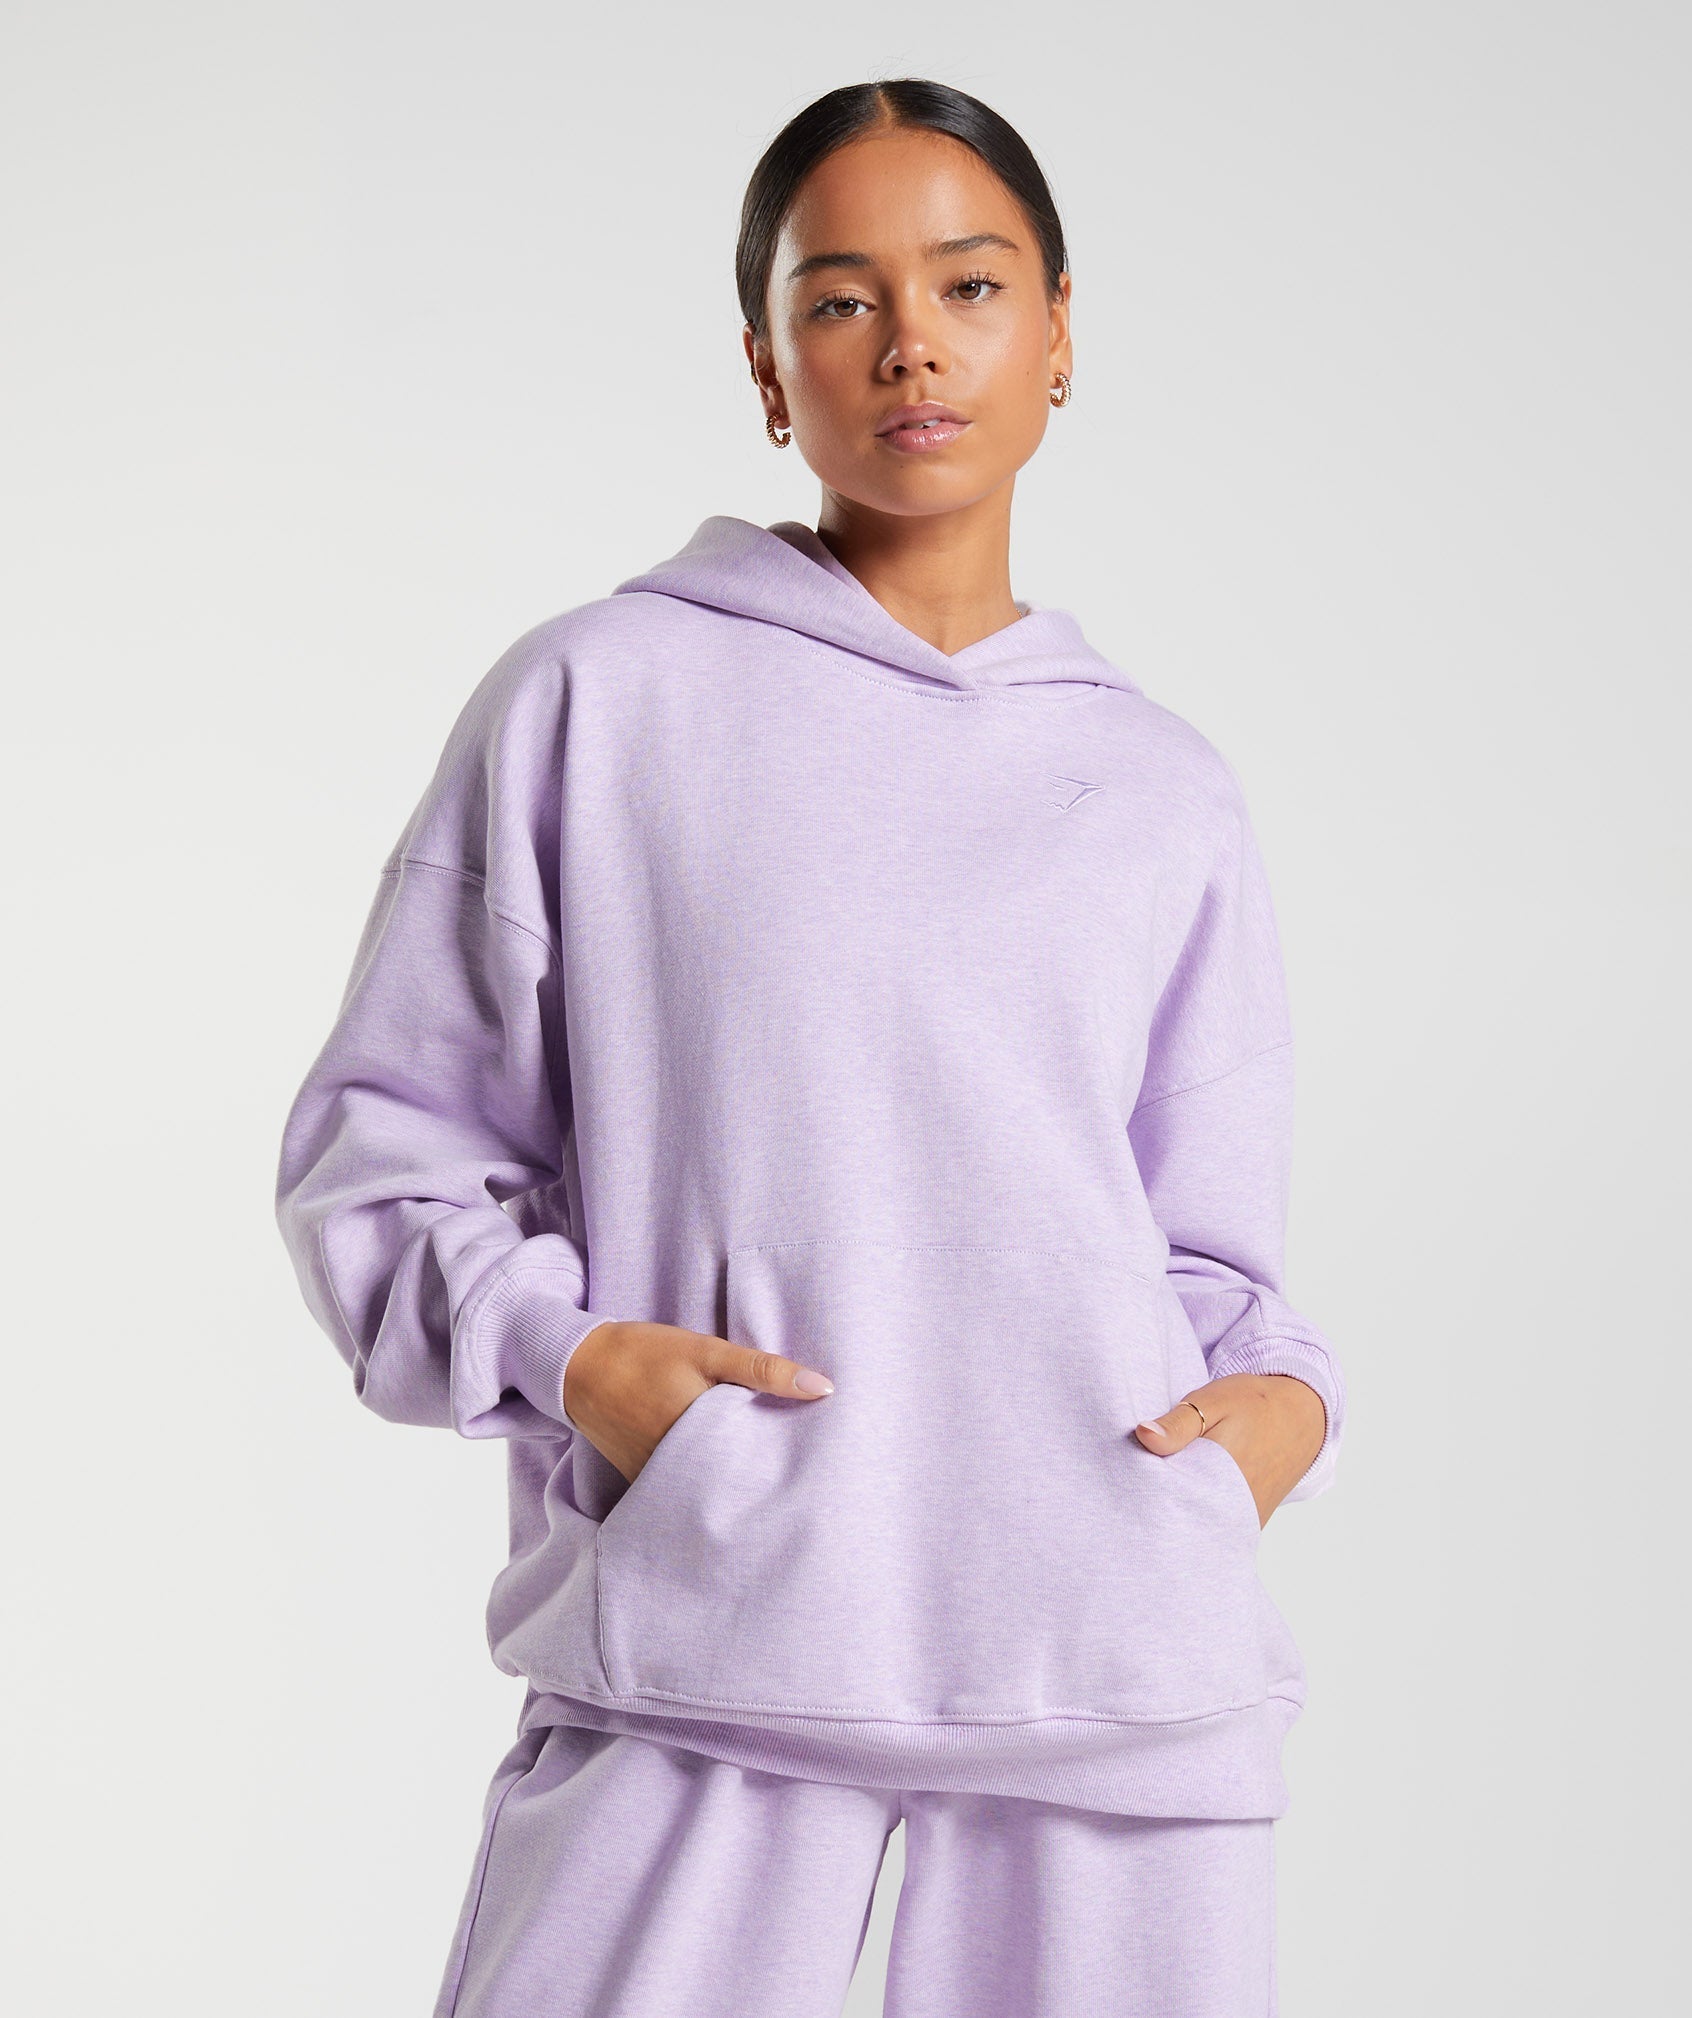 Rest Day Sweats Hoodie in Aura Lilac Marl - view 1